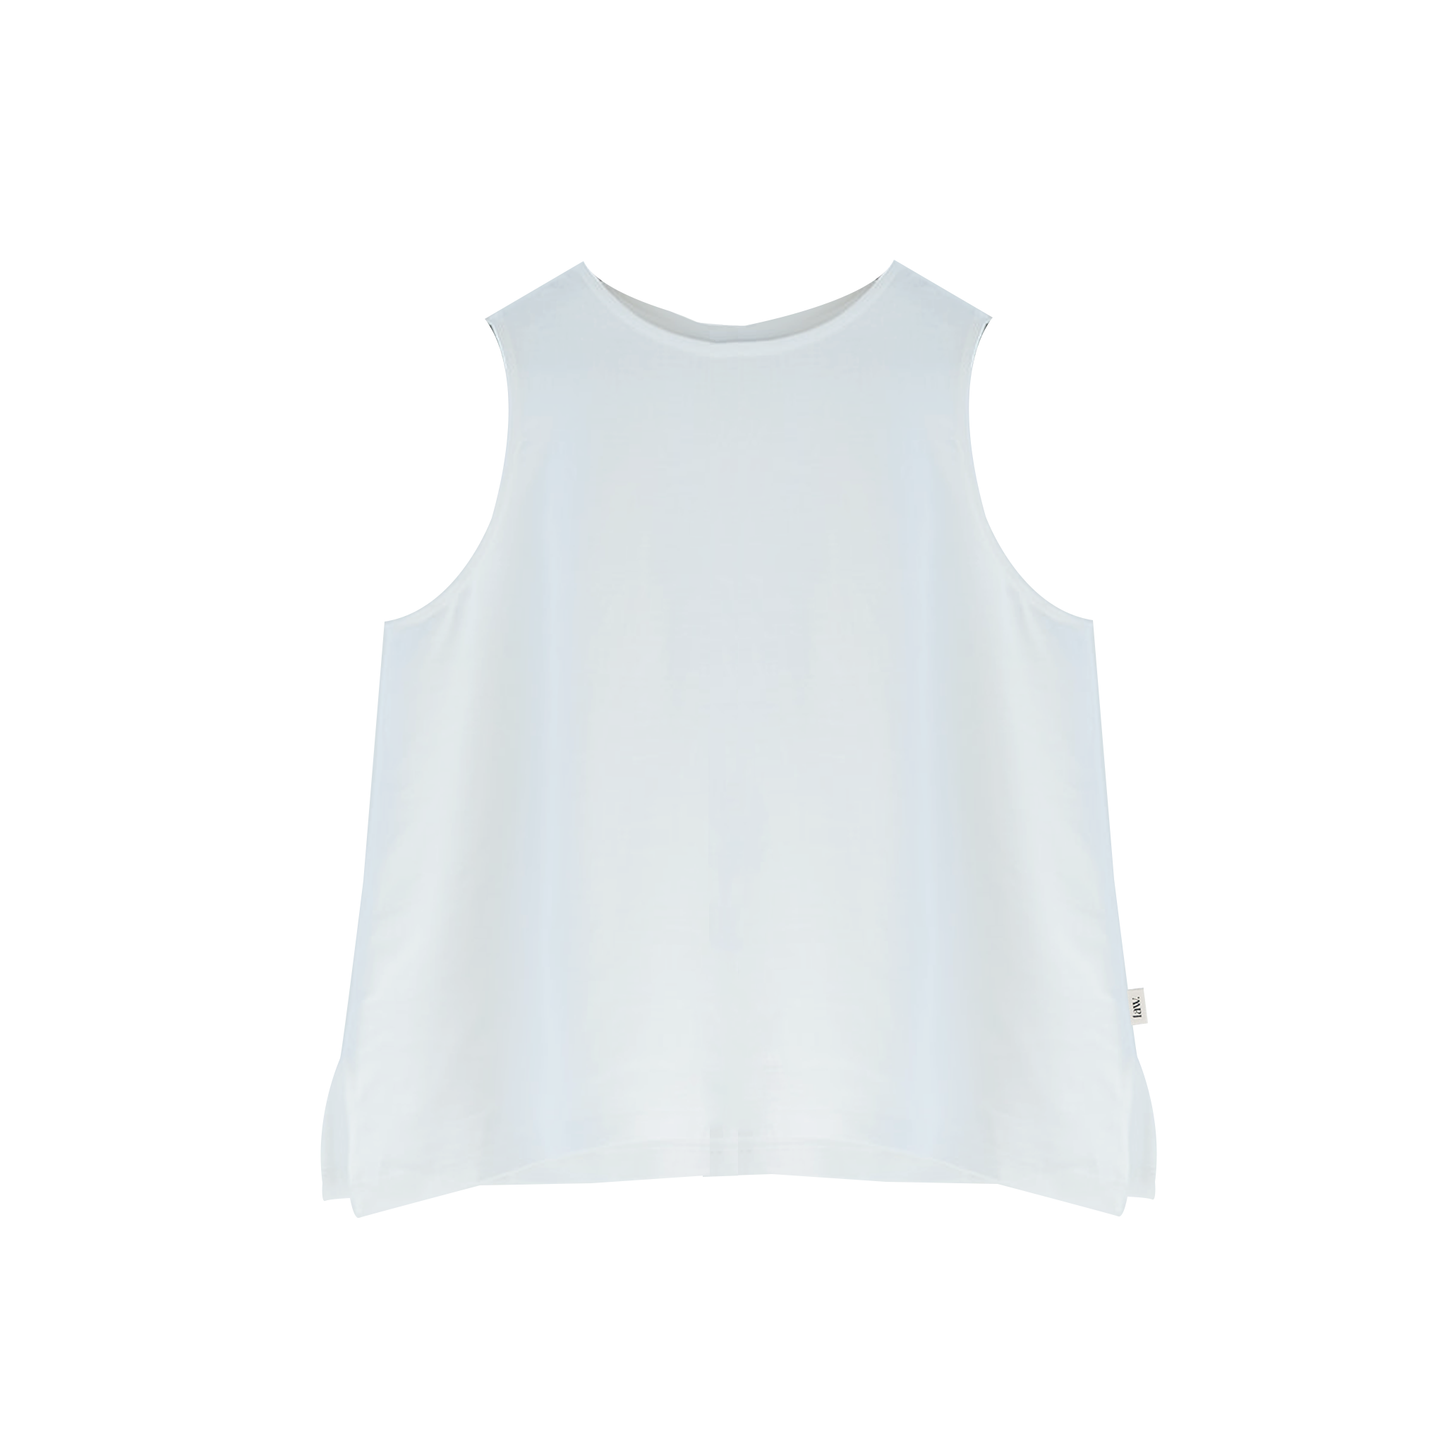 WHITE SLEEVELESS TOP CUT OUT